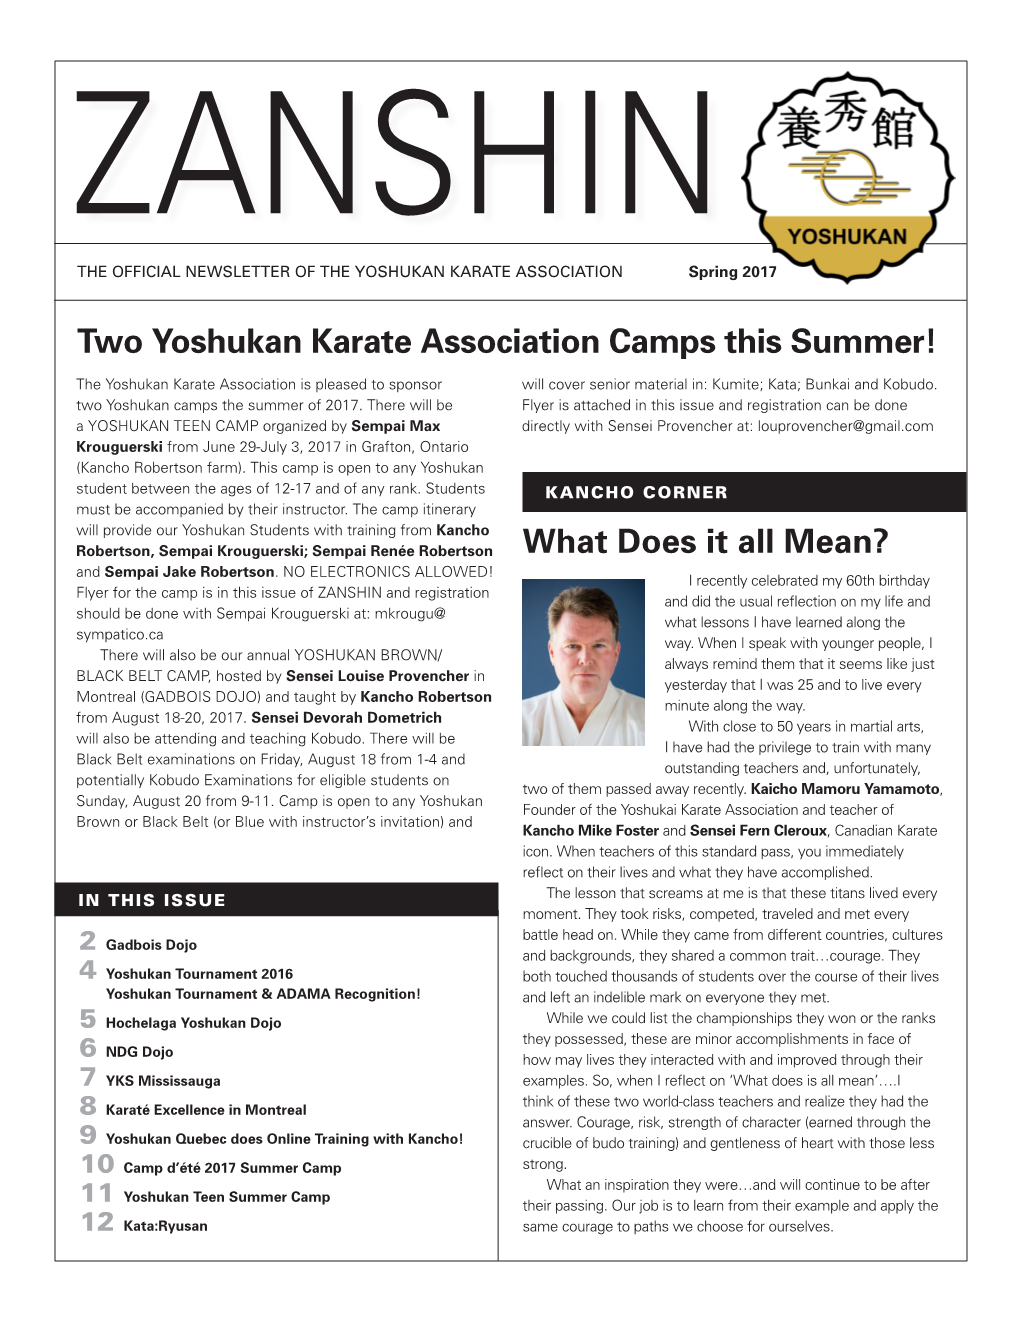 Two Yoshukan Karate Association Camps This Summer! What Does It All Mean?